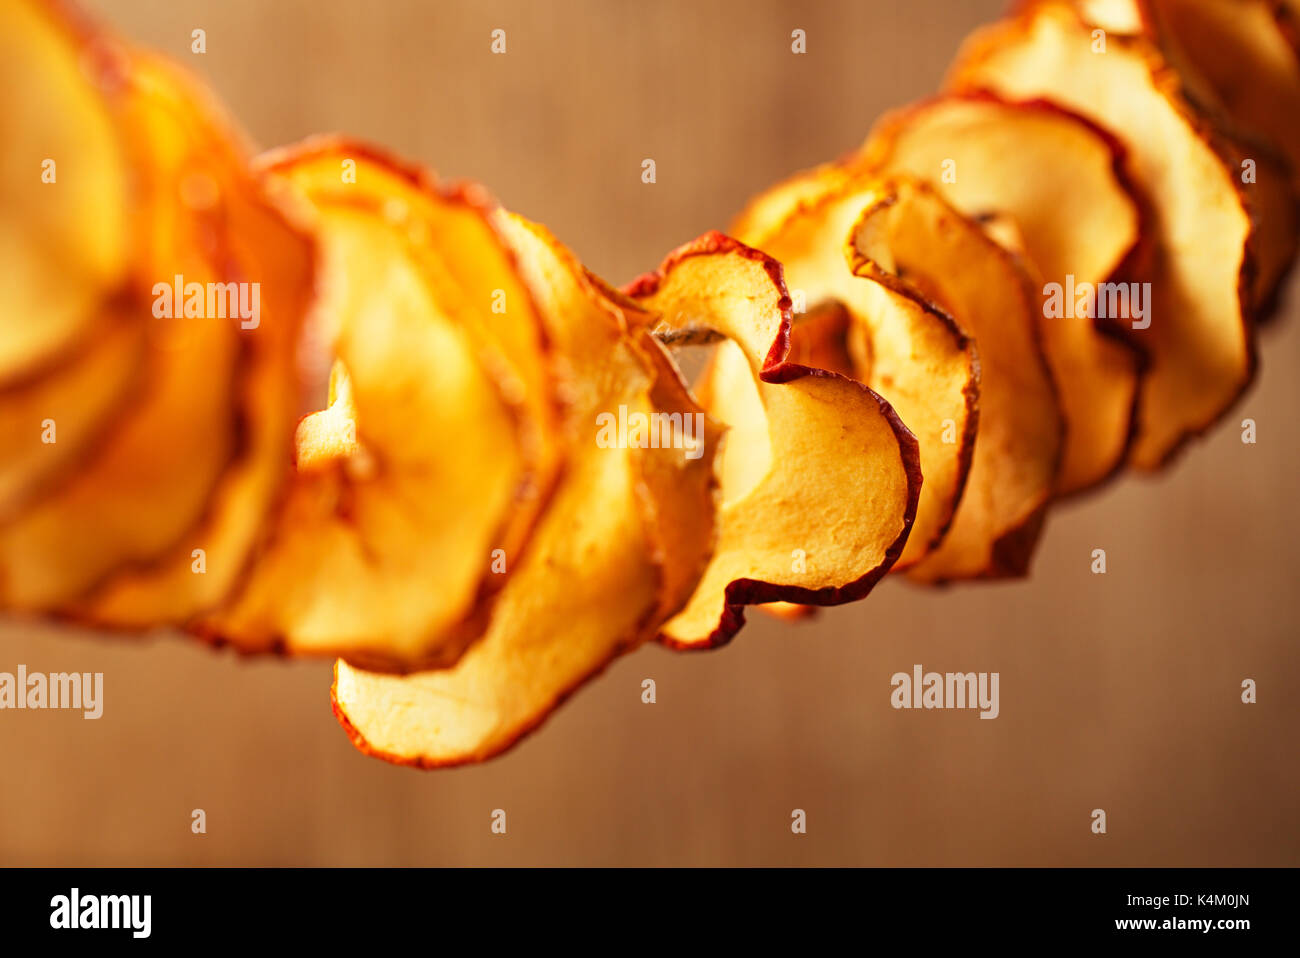 Dried apple slices and wooden backdrop Stock Photo